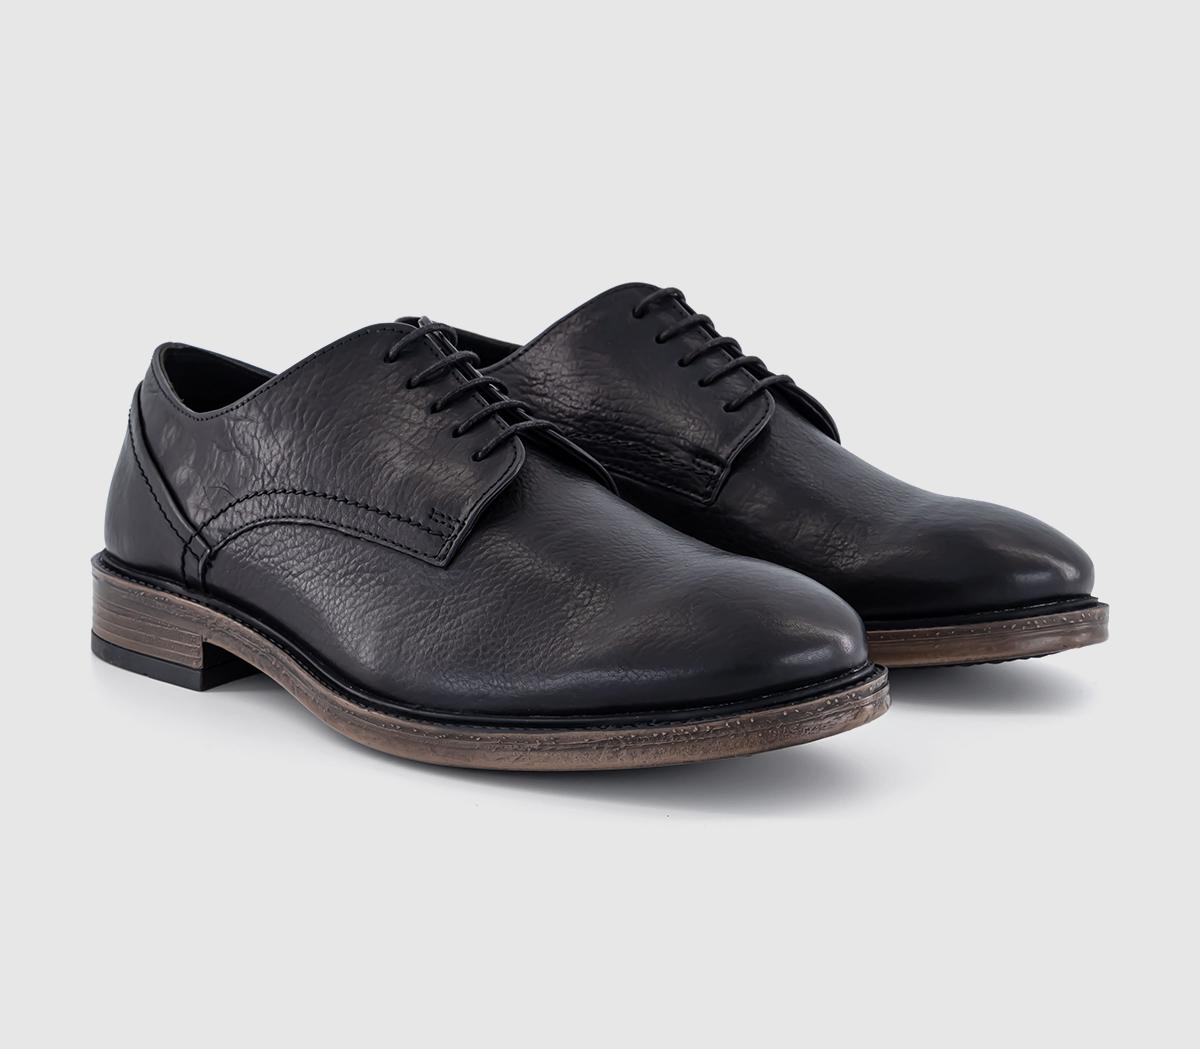 OFFICE Cadeleigh Casual Leather Derby Shoes Black, 8